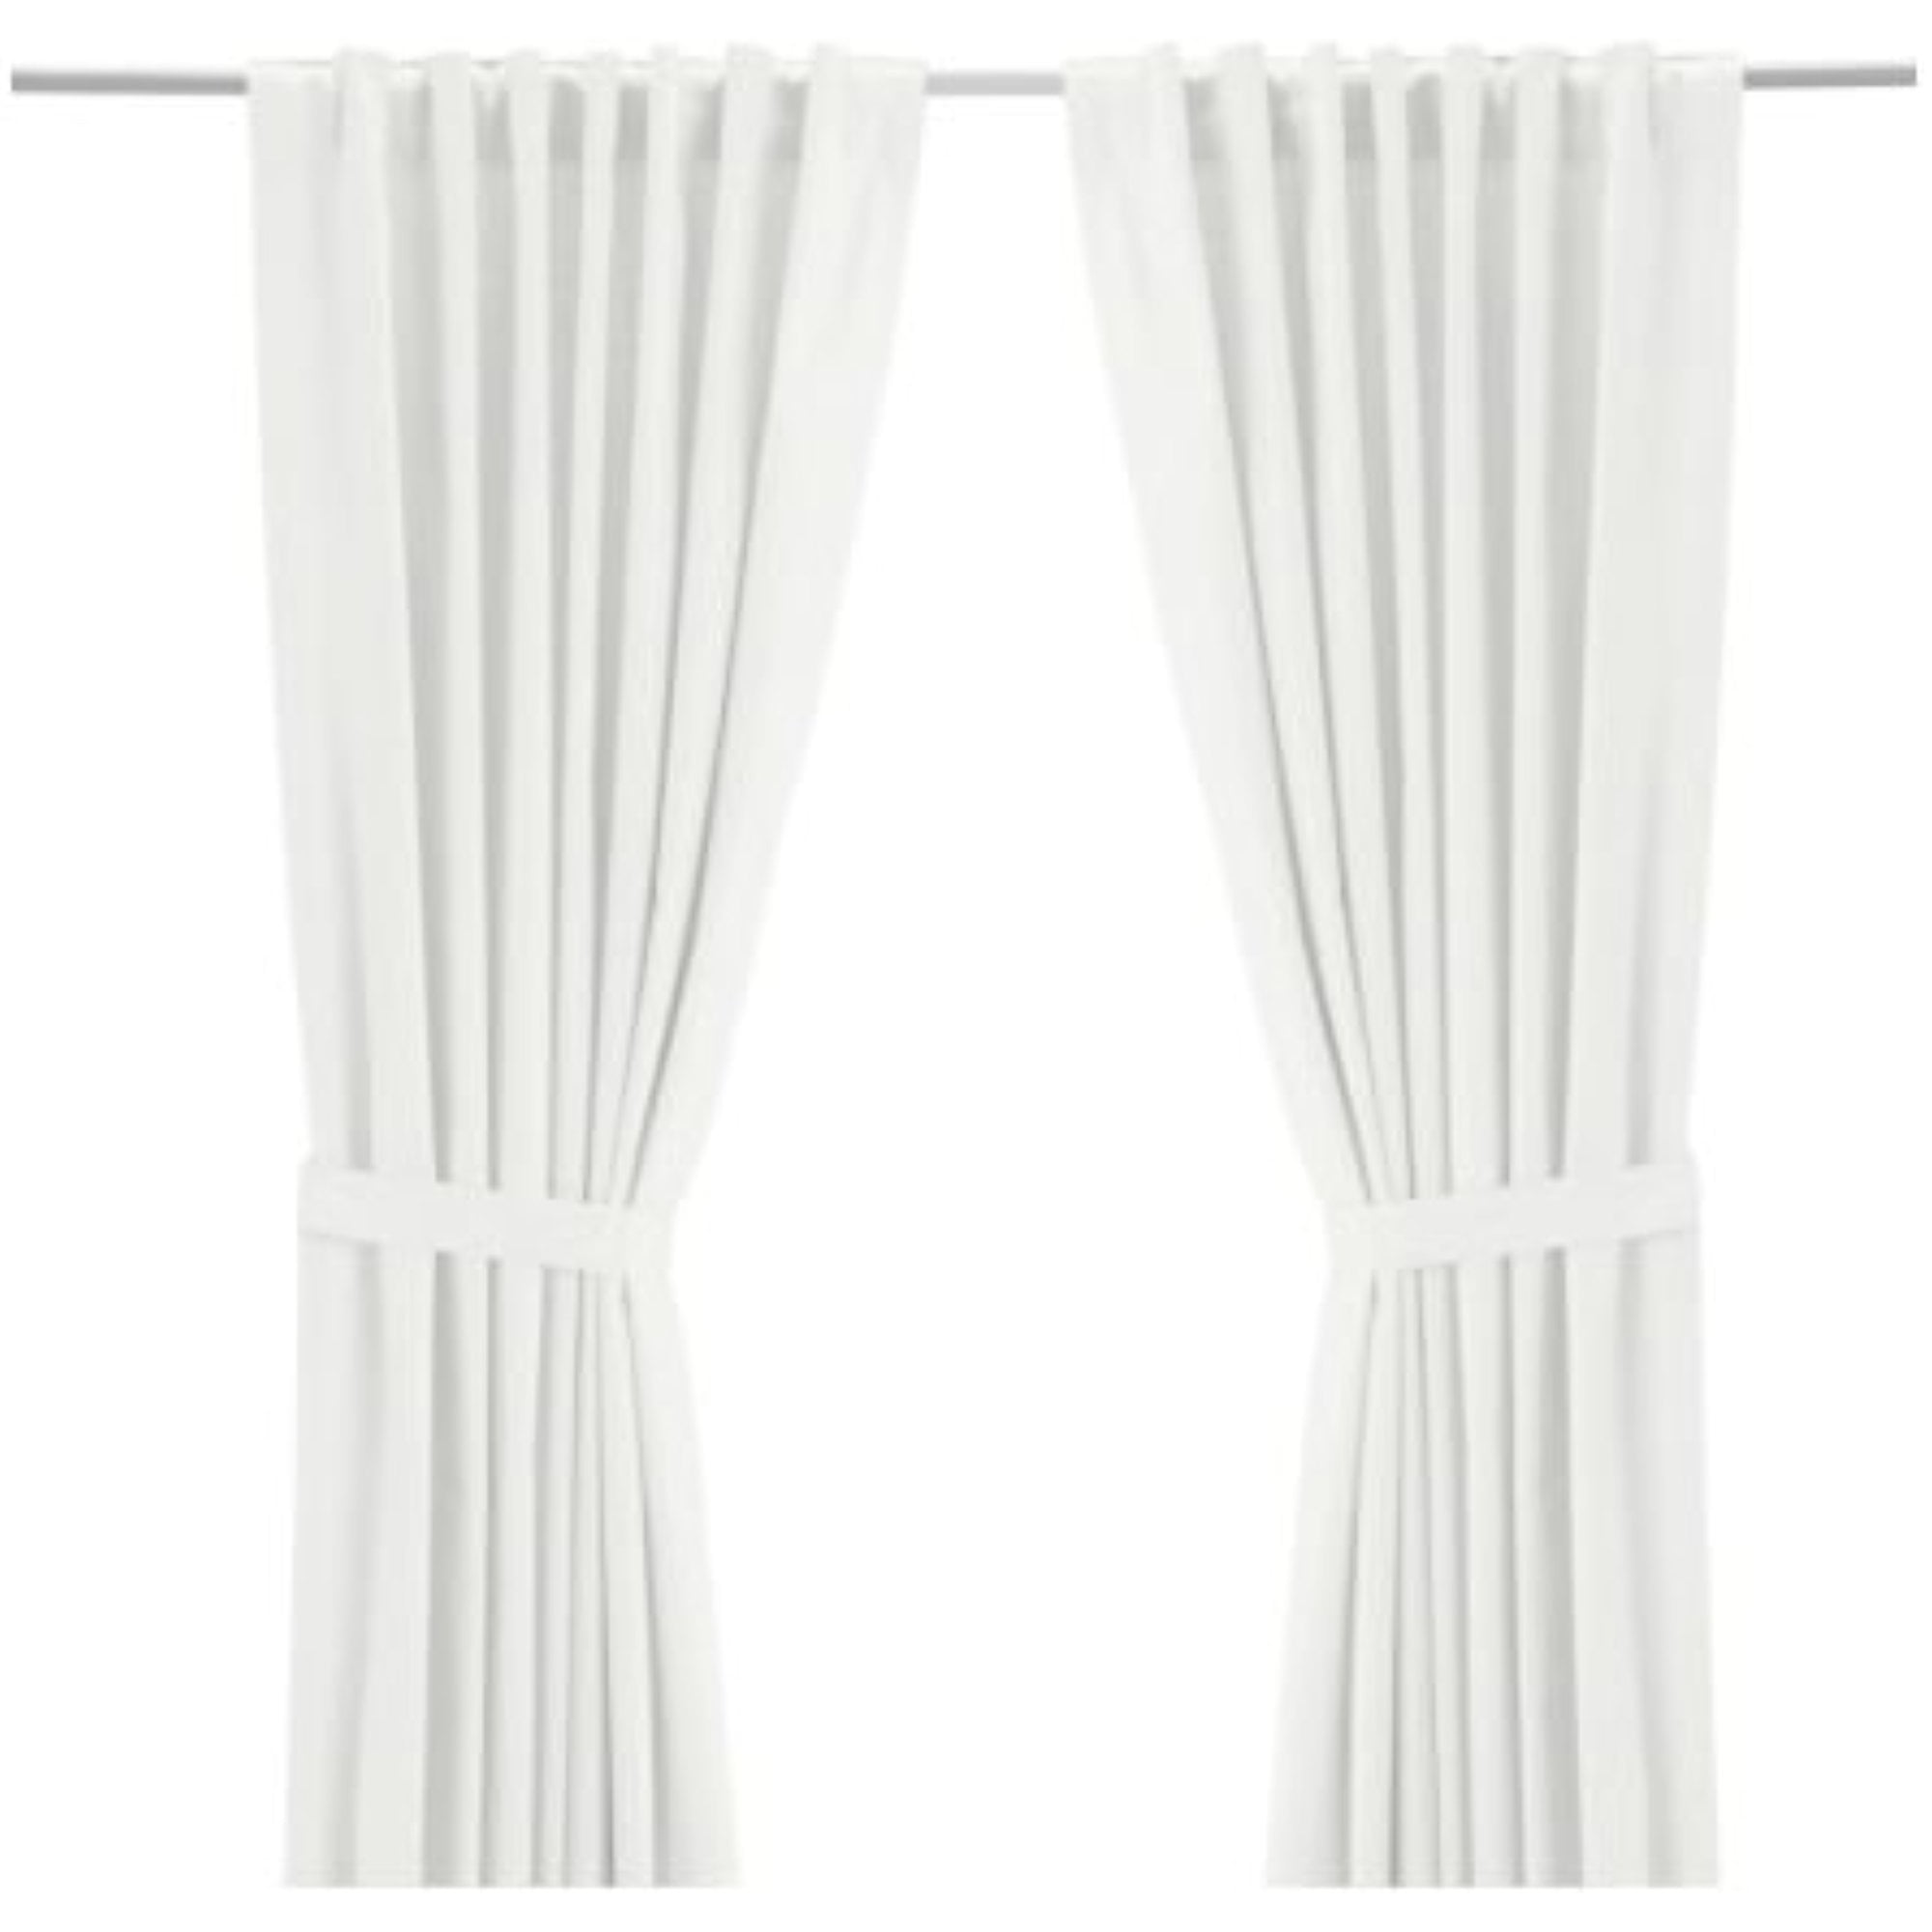 Ikea Curtains with tie-backs, 1 pair, white 57x65 ", 2214.81117.410